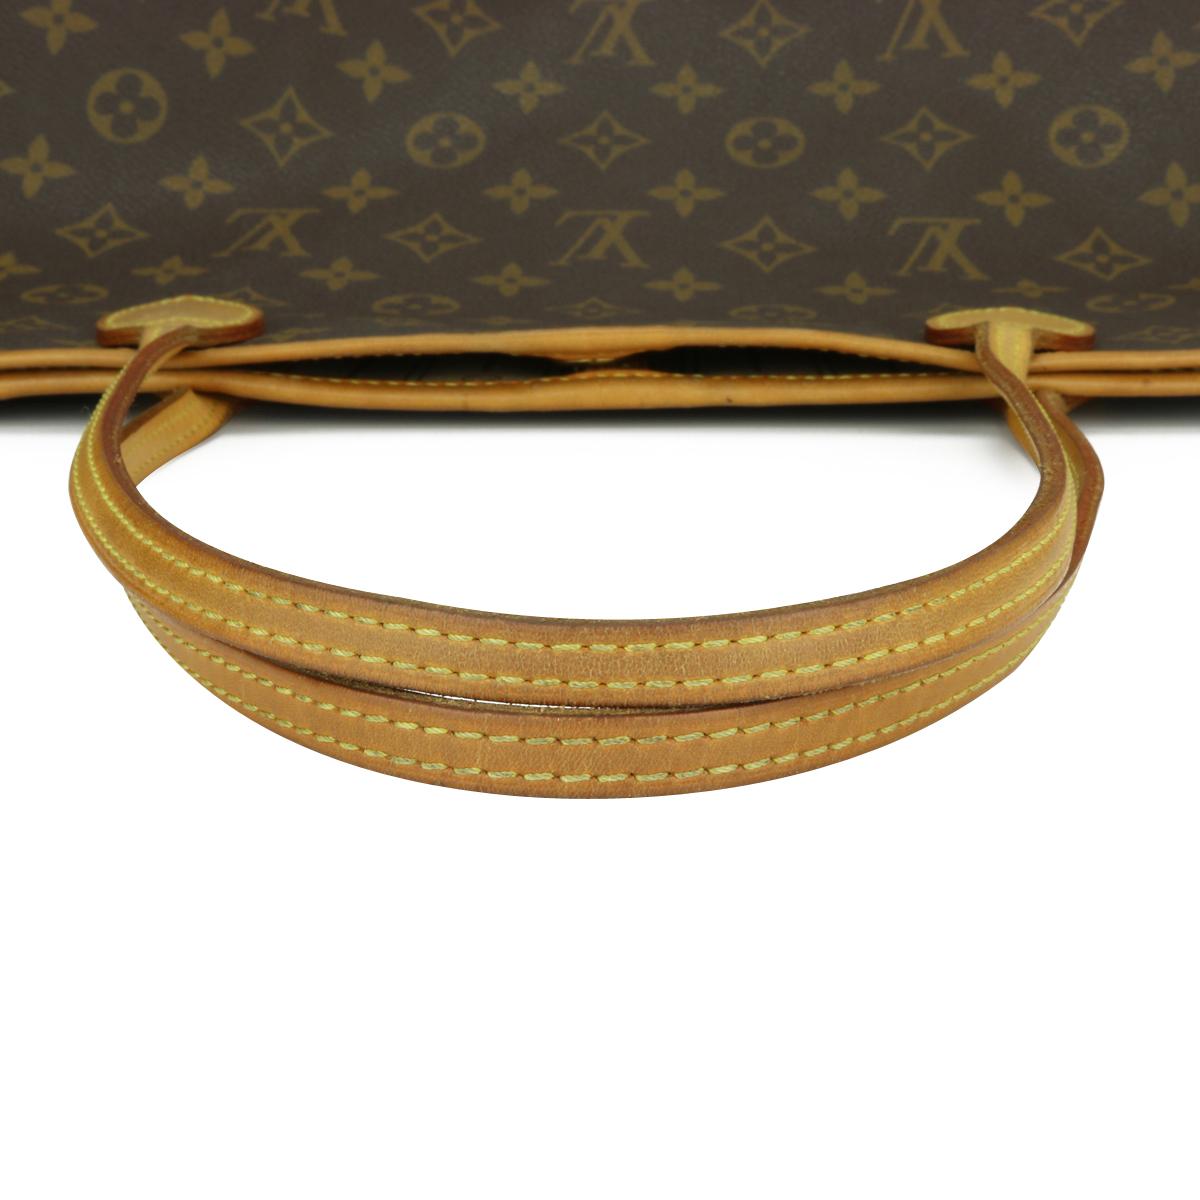 Louis Vuitton Neverfull GM Bag in Monogram with Beige Interior 2008 8